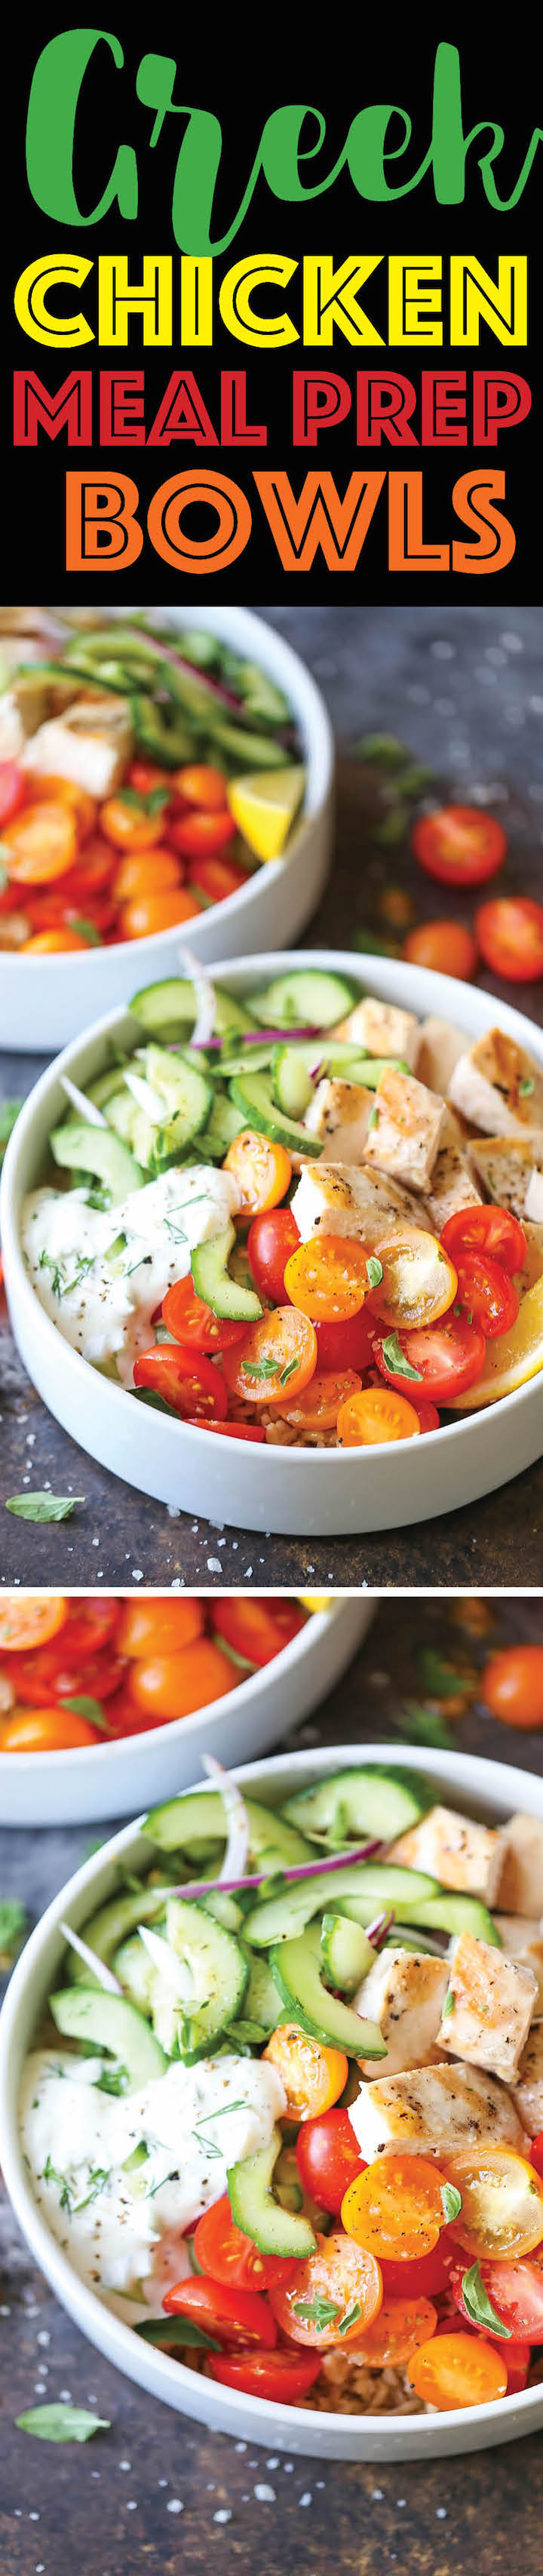 Greek Chicken Meal Prep Bowls - Packed with everyone's favorite fresh Greek flavors! With chicken, cucumber salad and homemade Greek yogurt tzatziki sauce!